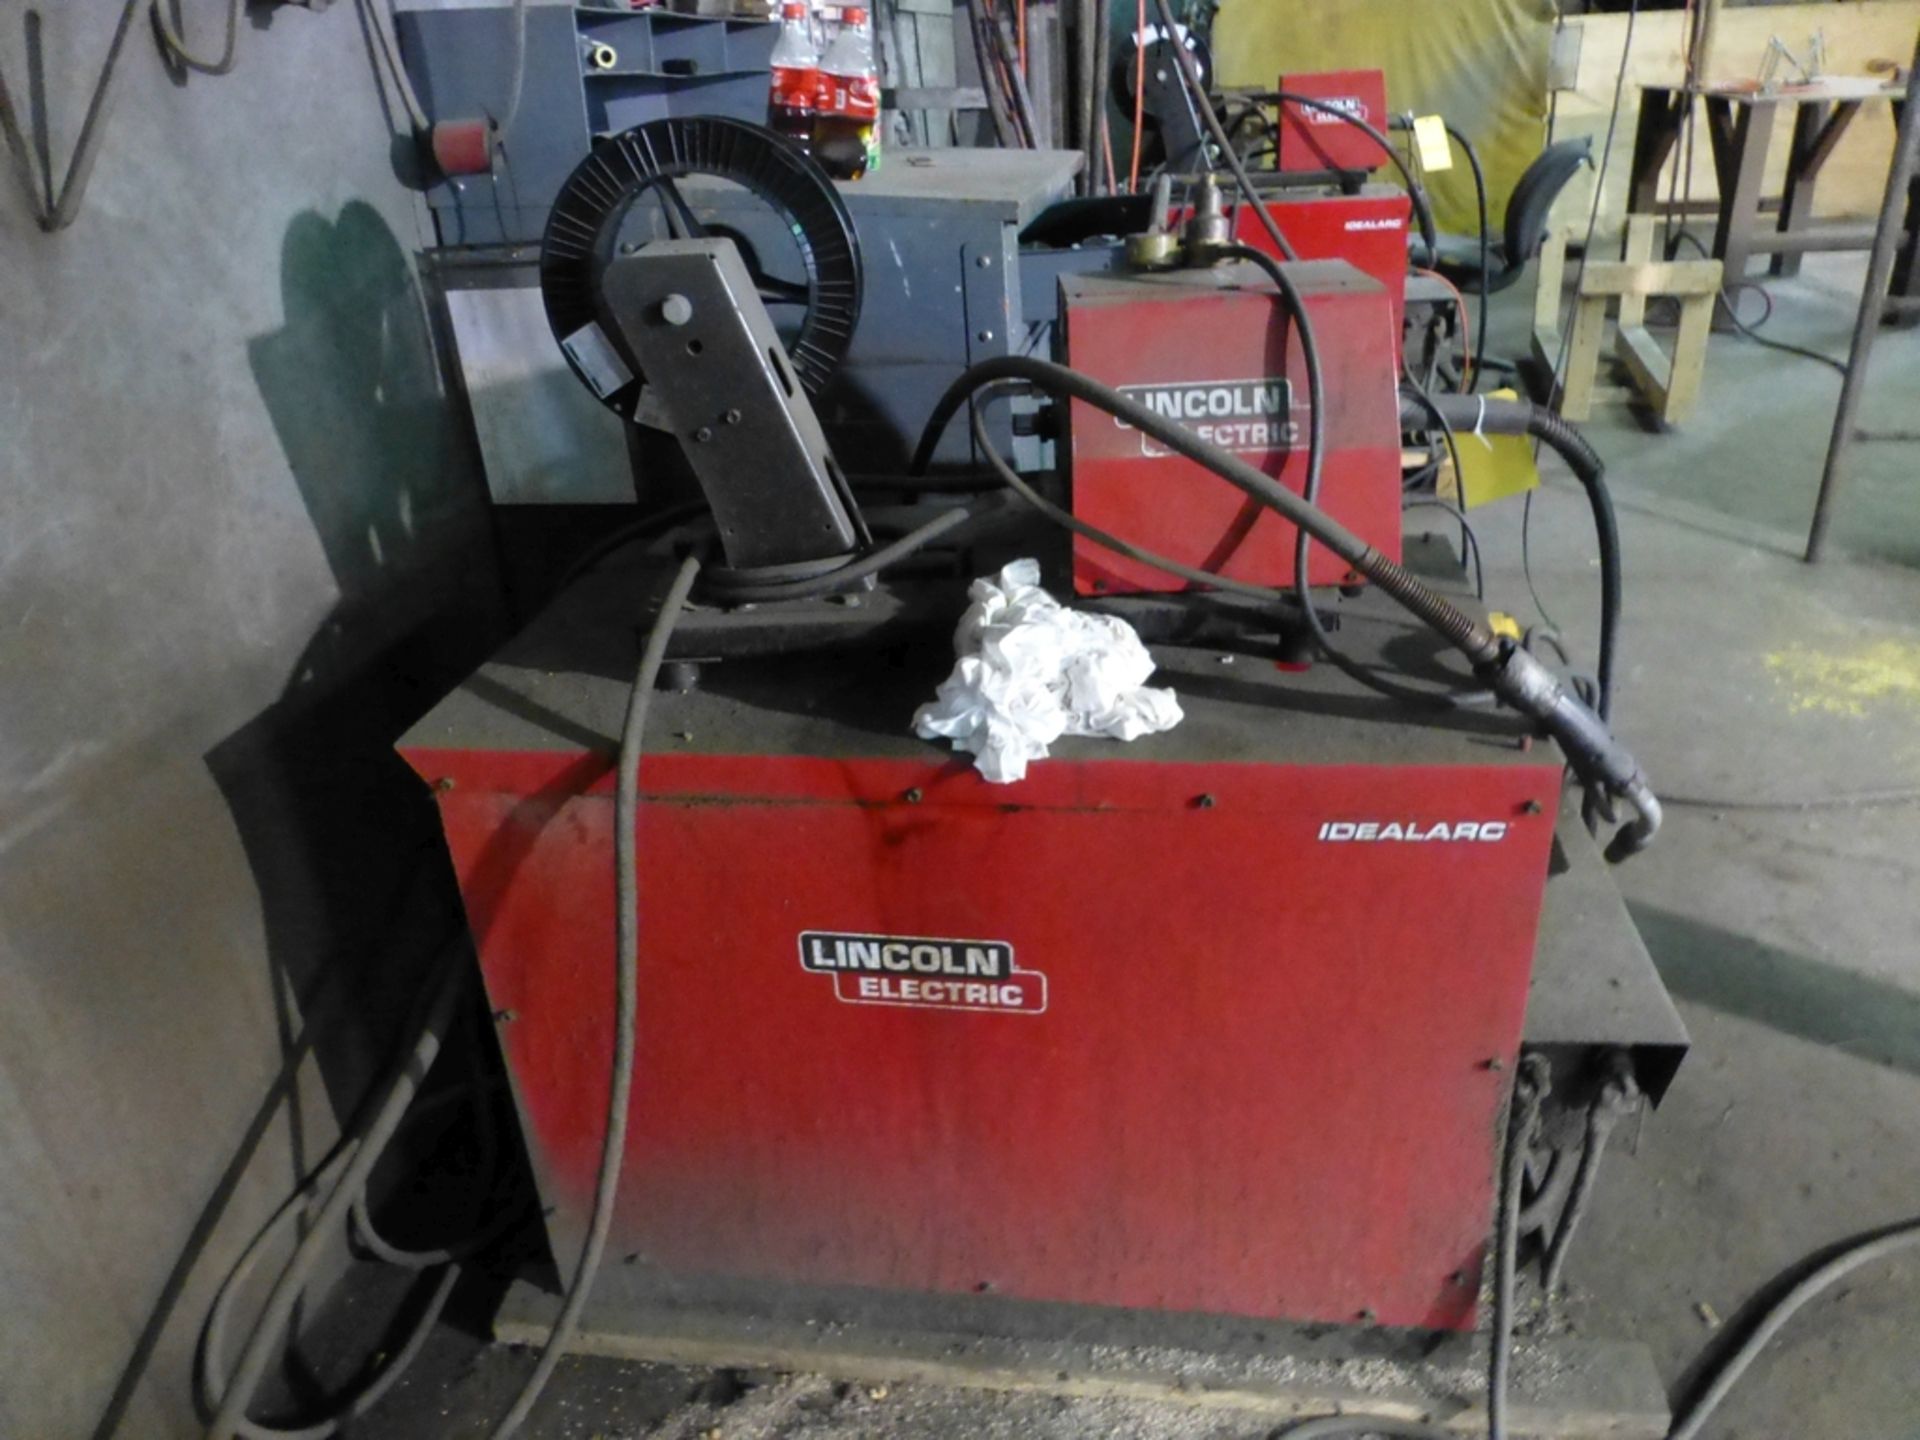 Lincoln Idealarc DC 600 Multi-Process Welder|With LF-74 Wire Feed - Image 2 of 13